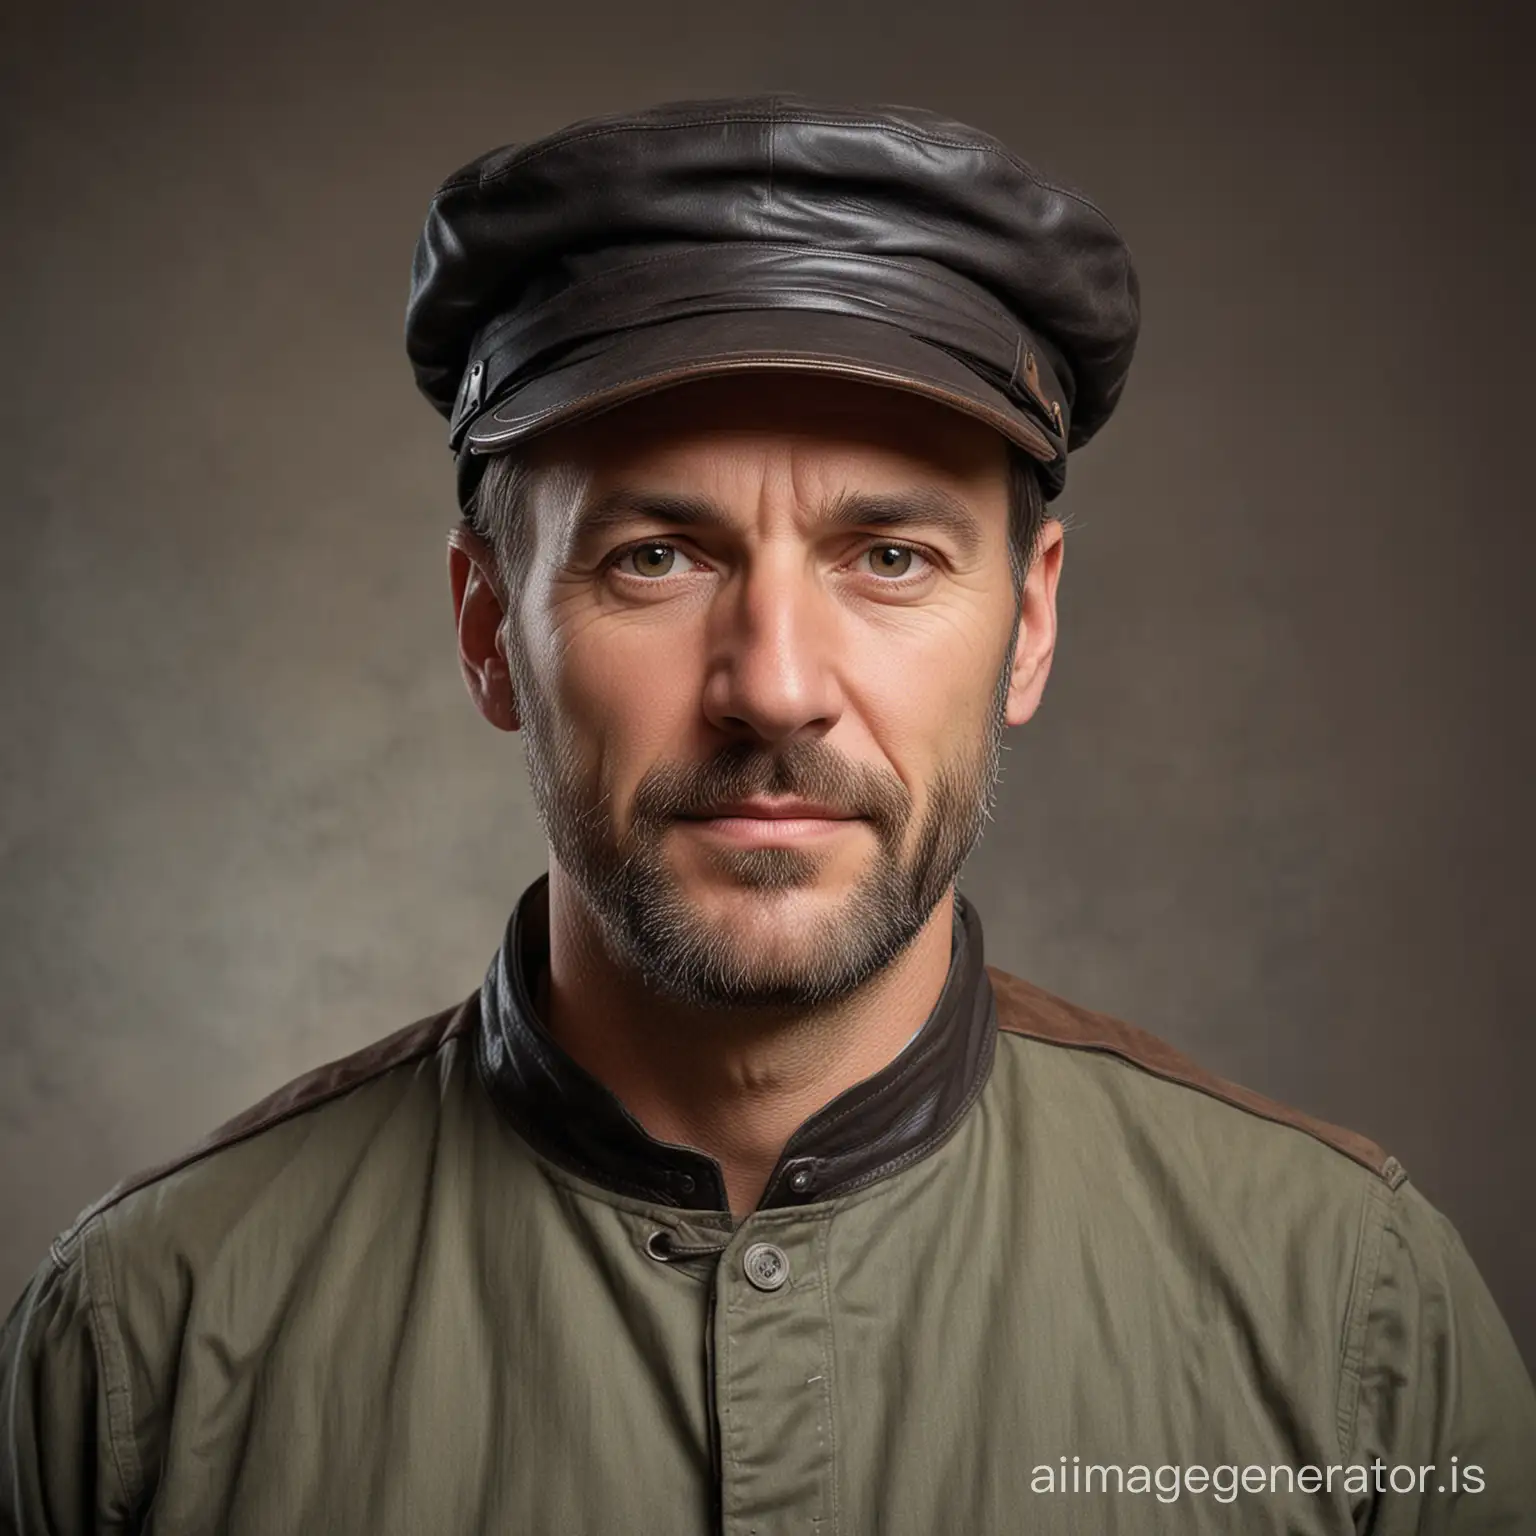 a man of fifty years old in the XIX century in worker's attire. A man of medium height, stocky and robust. A cap with a leather visor covered part of his face